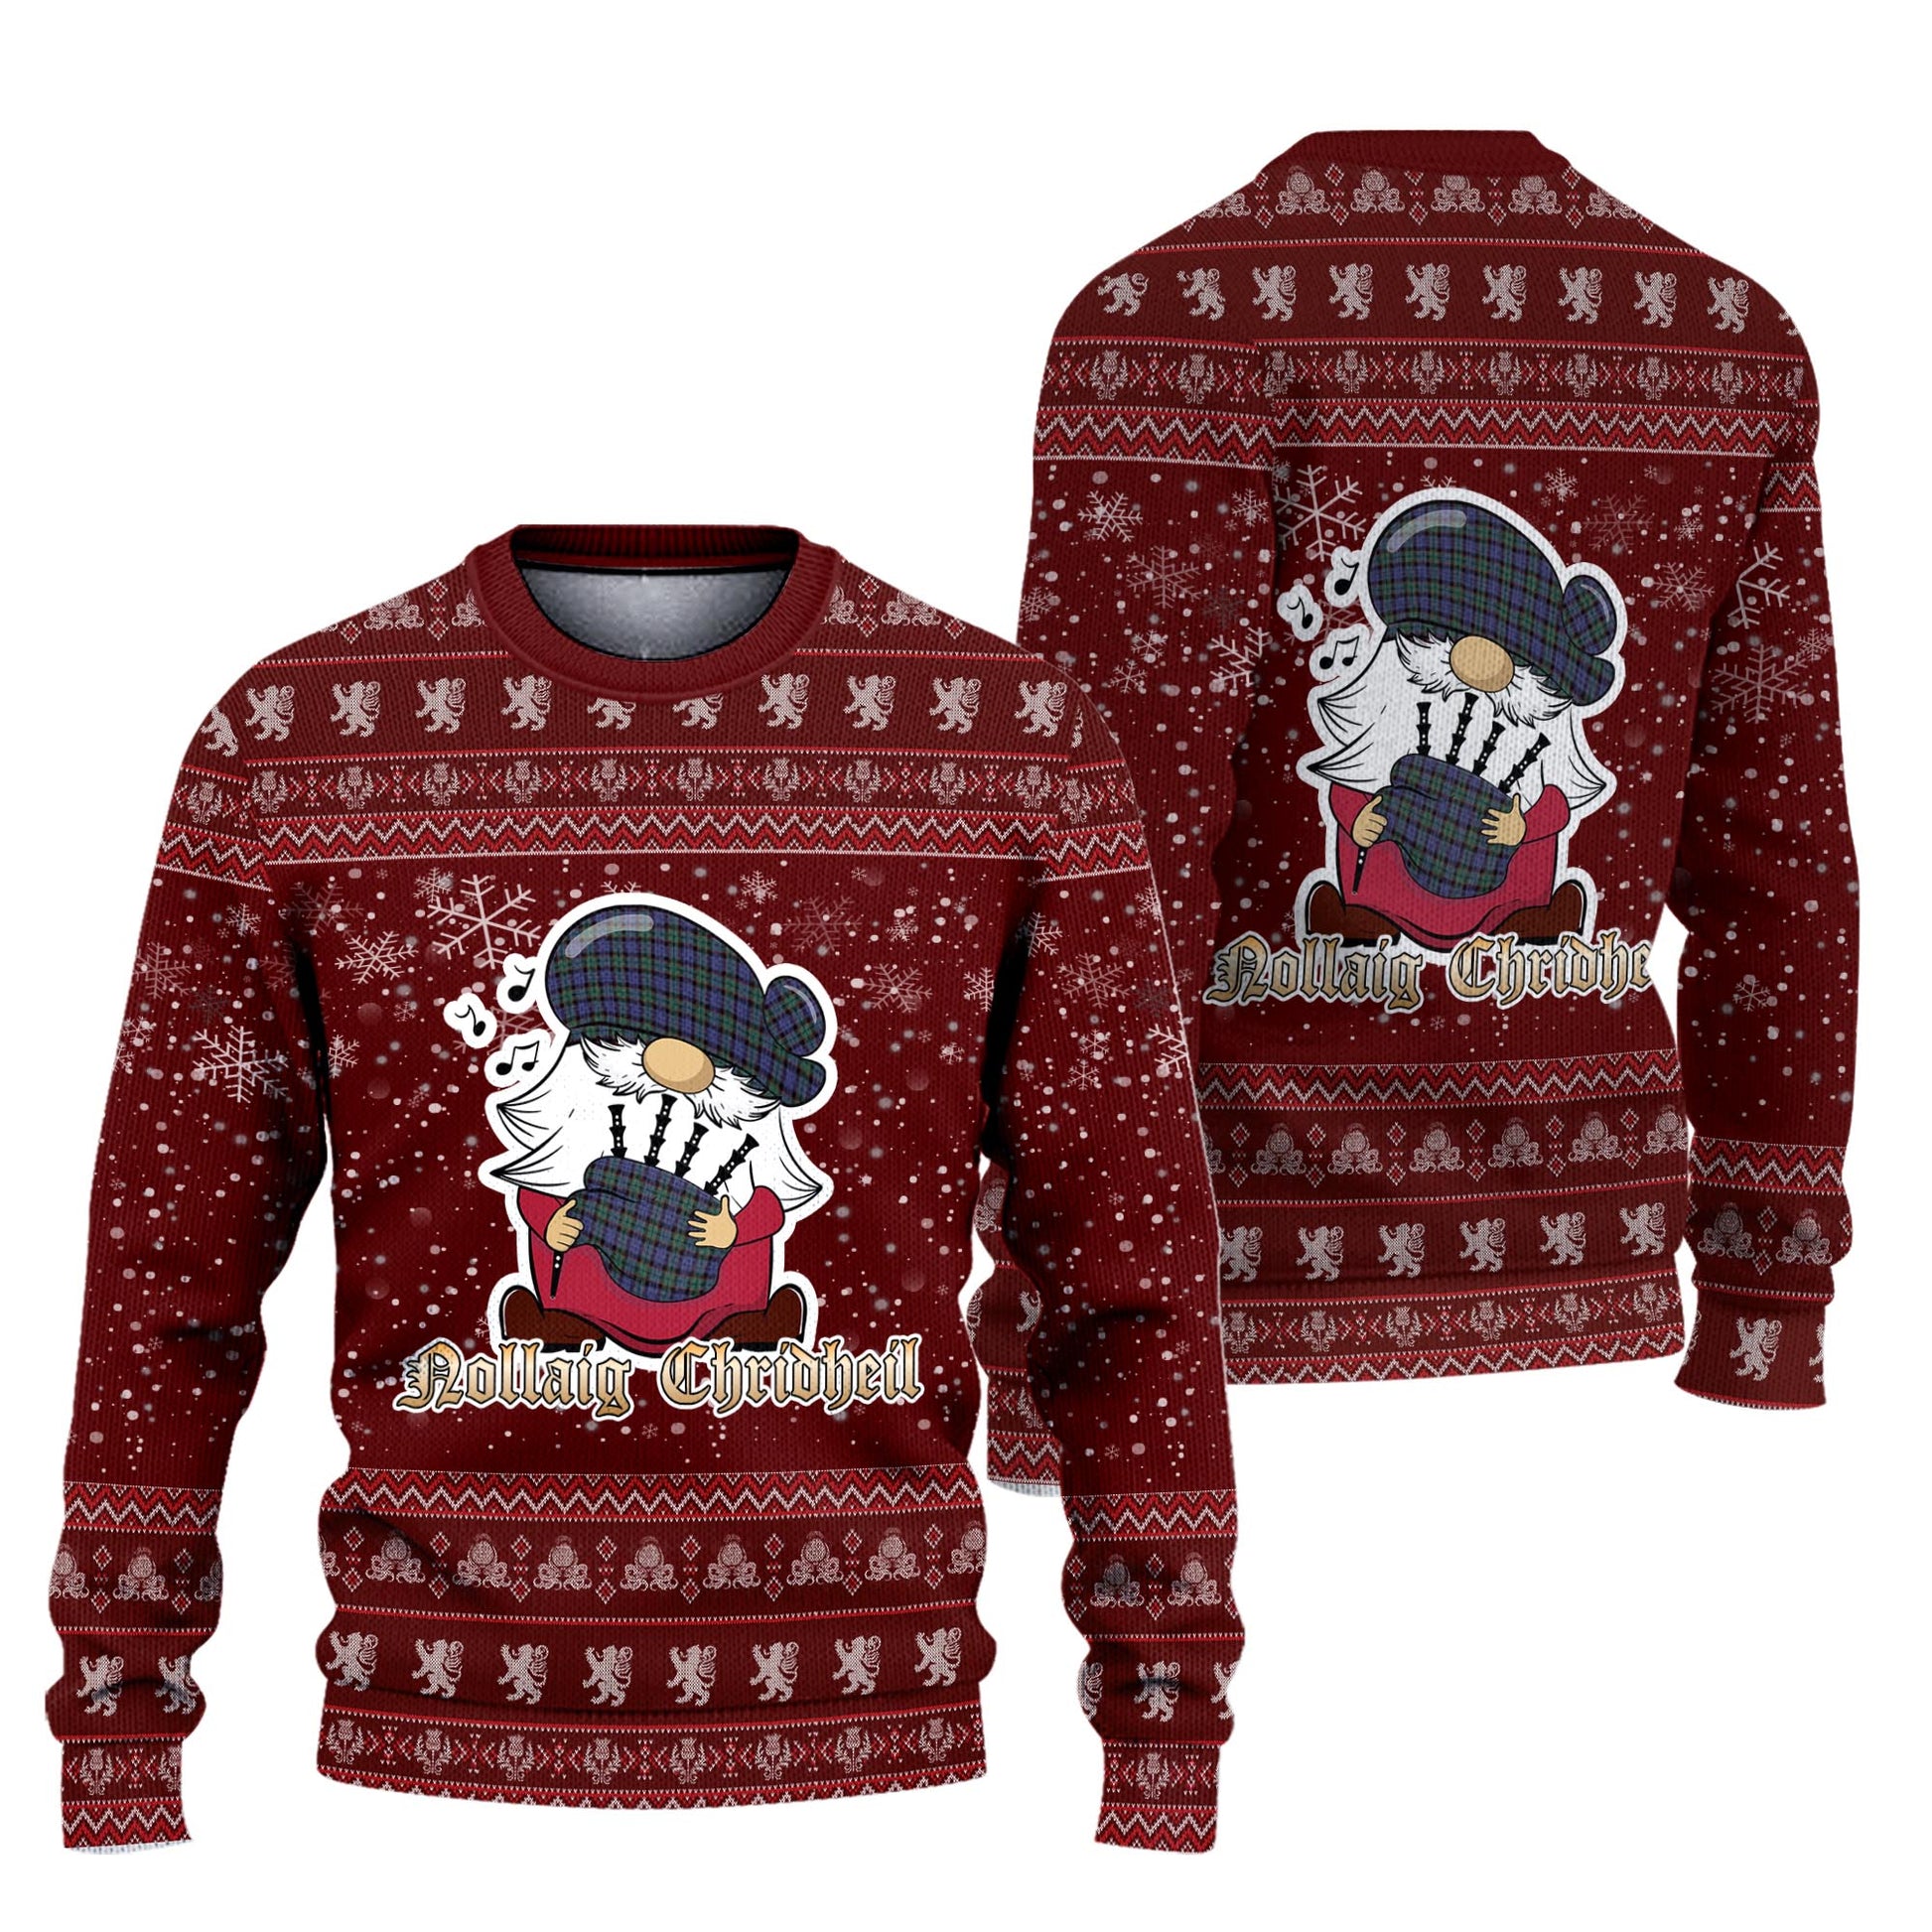 Fletcher Modern Clan Christmas Family Knitted Sweater with Funny Gnome Playing Bagpipes Unisex Red - Tartanvibesclothing